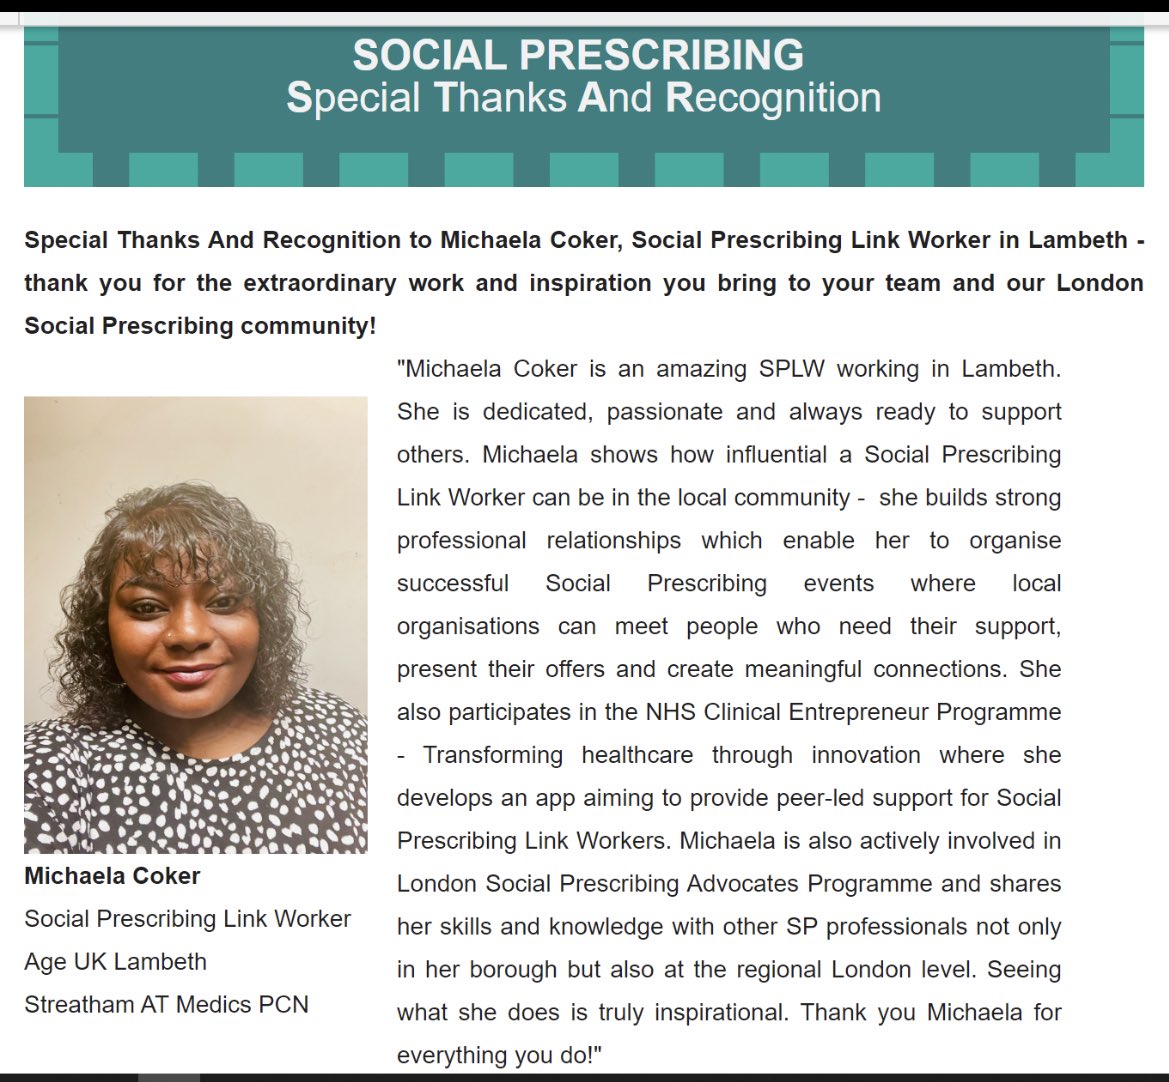 What a nice way to start the week 🙂 I have been nominated for special thanks and recognition in the London Social Prescribing Newsletter! @SP_LDN @AgeUKLambeth @ATMedics @NHS_CEP #SocialPrescribing #NHSCEP  mailchi.mp/1520528ecb50/h…